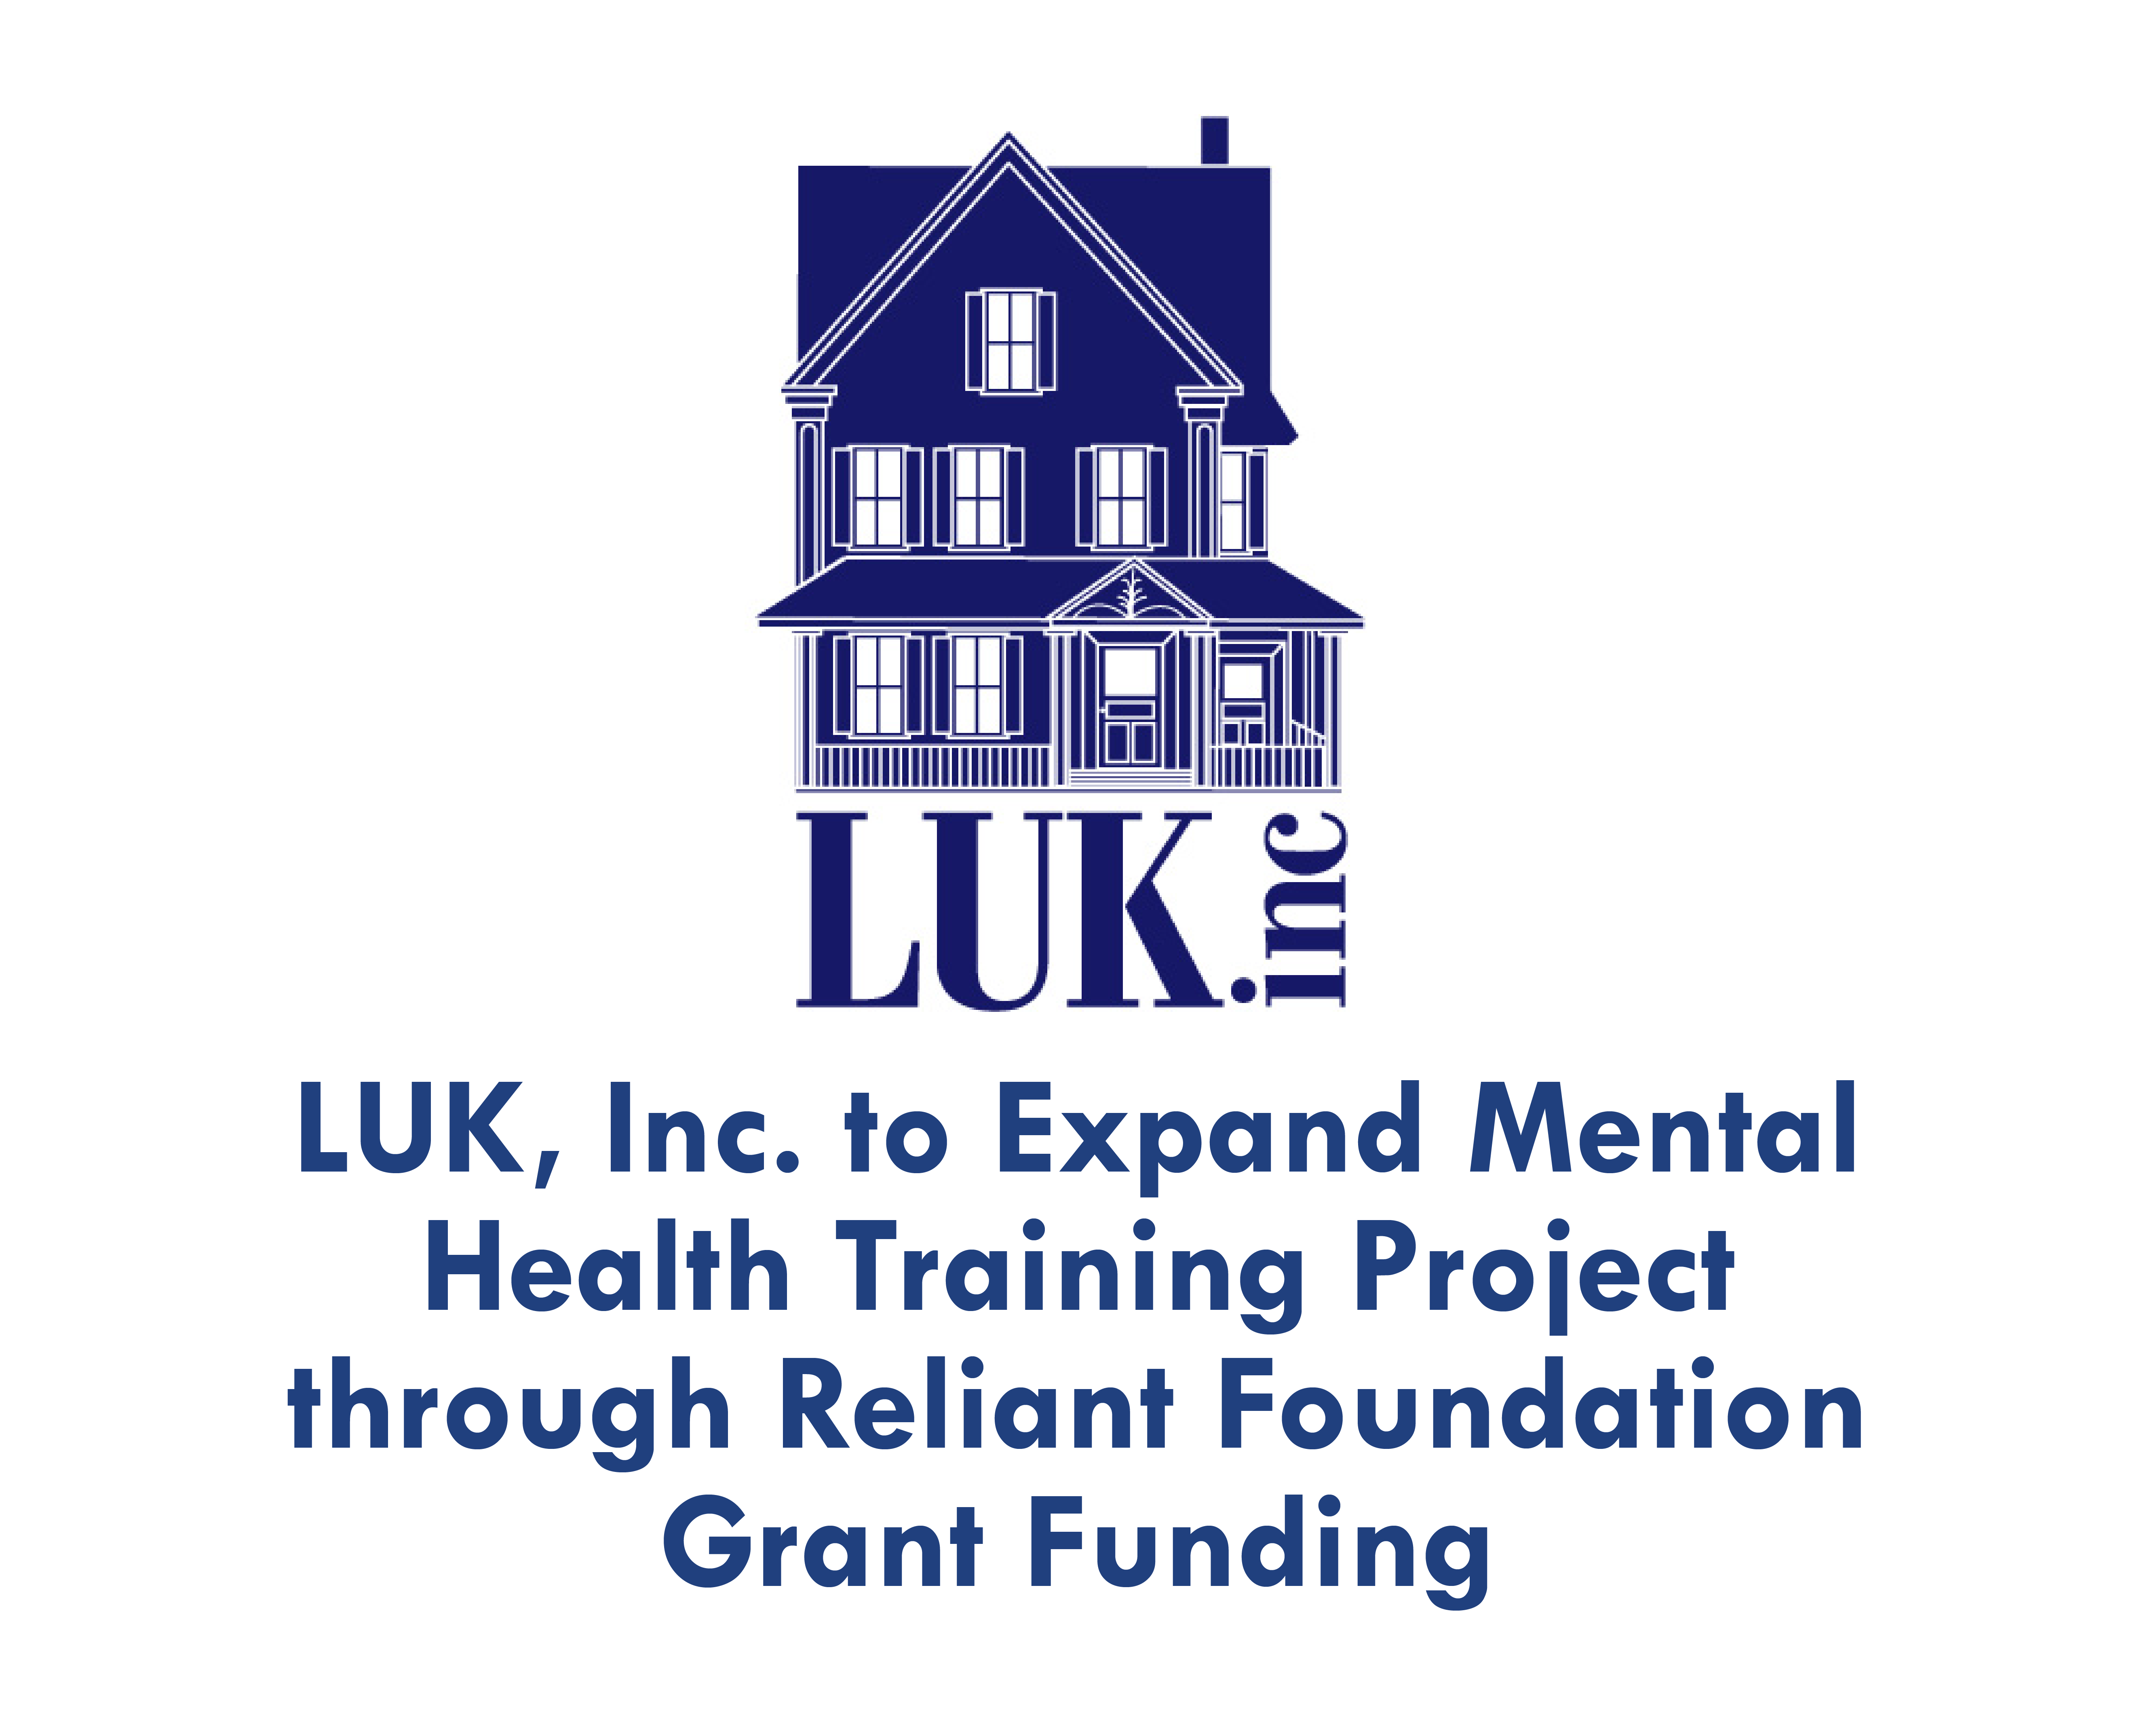 LUK logo and text that reads LUK, Inc. to expand mental health training project through Reliant foundation grant funding